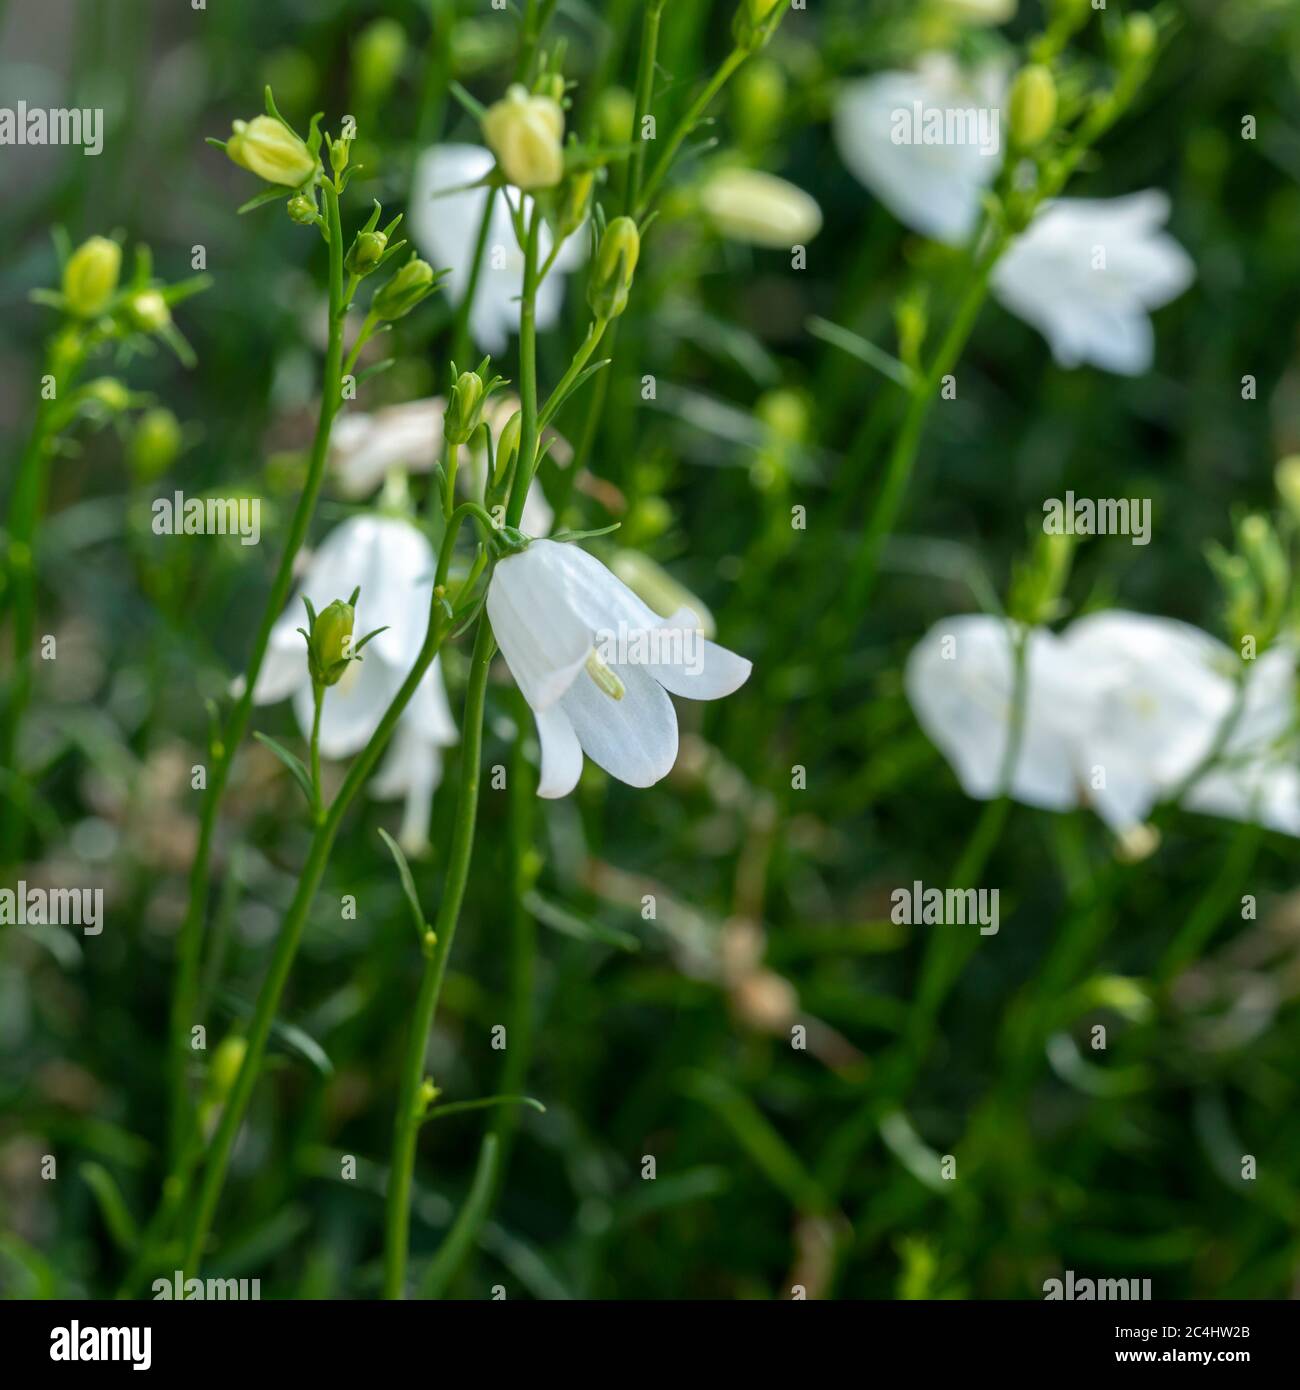 Closeup of little white Campanula flowers catching sunlight in a garden Stock Photo